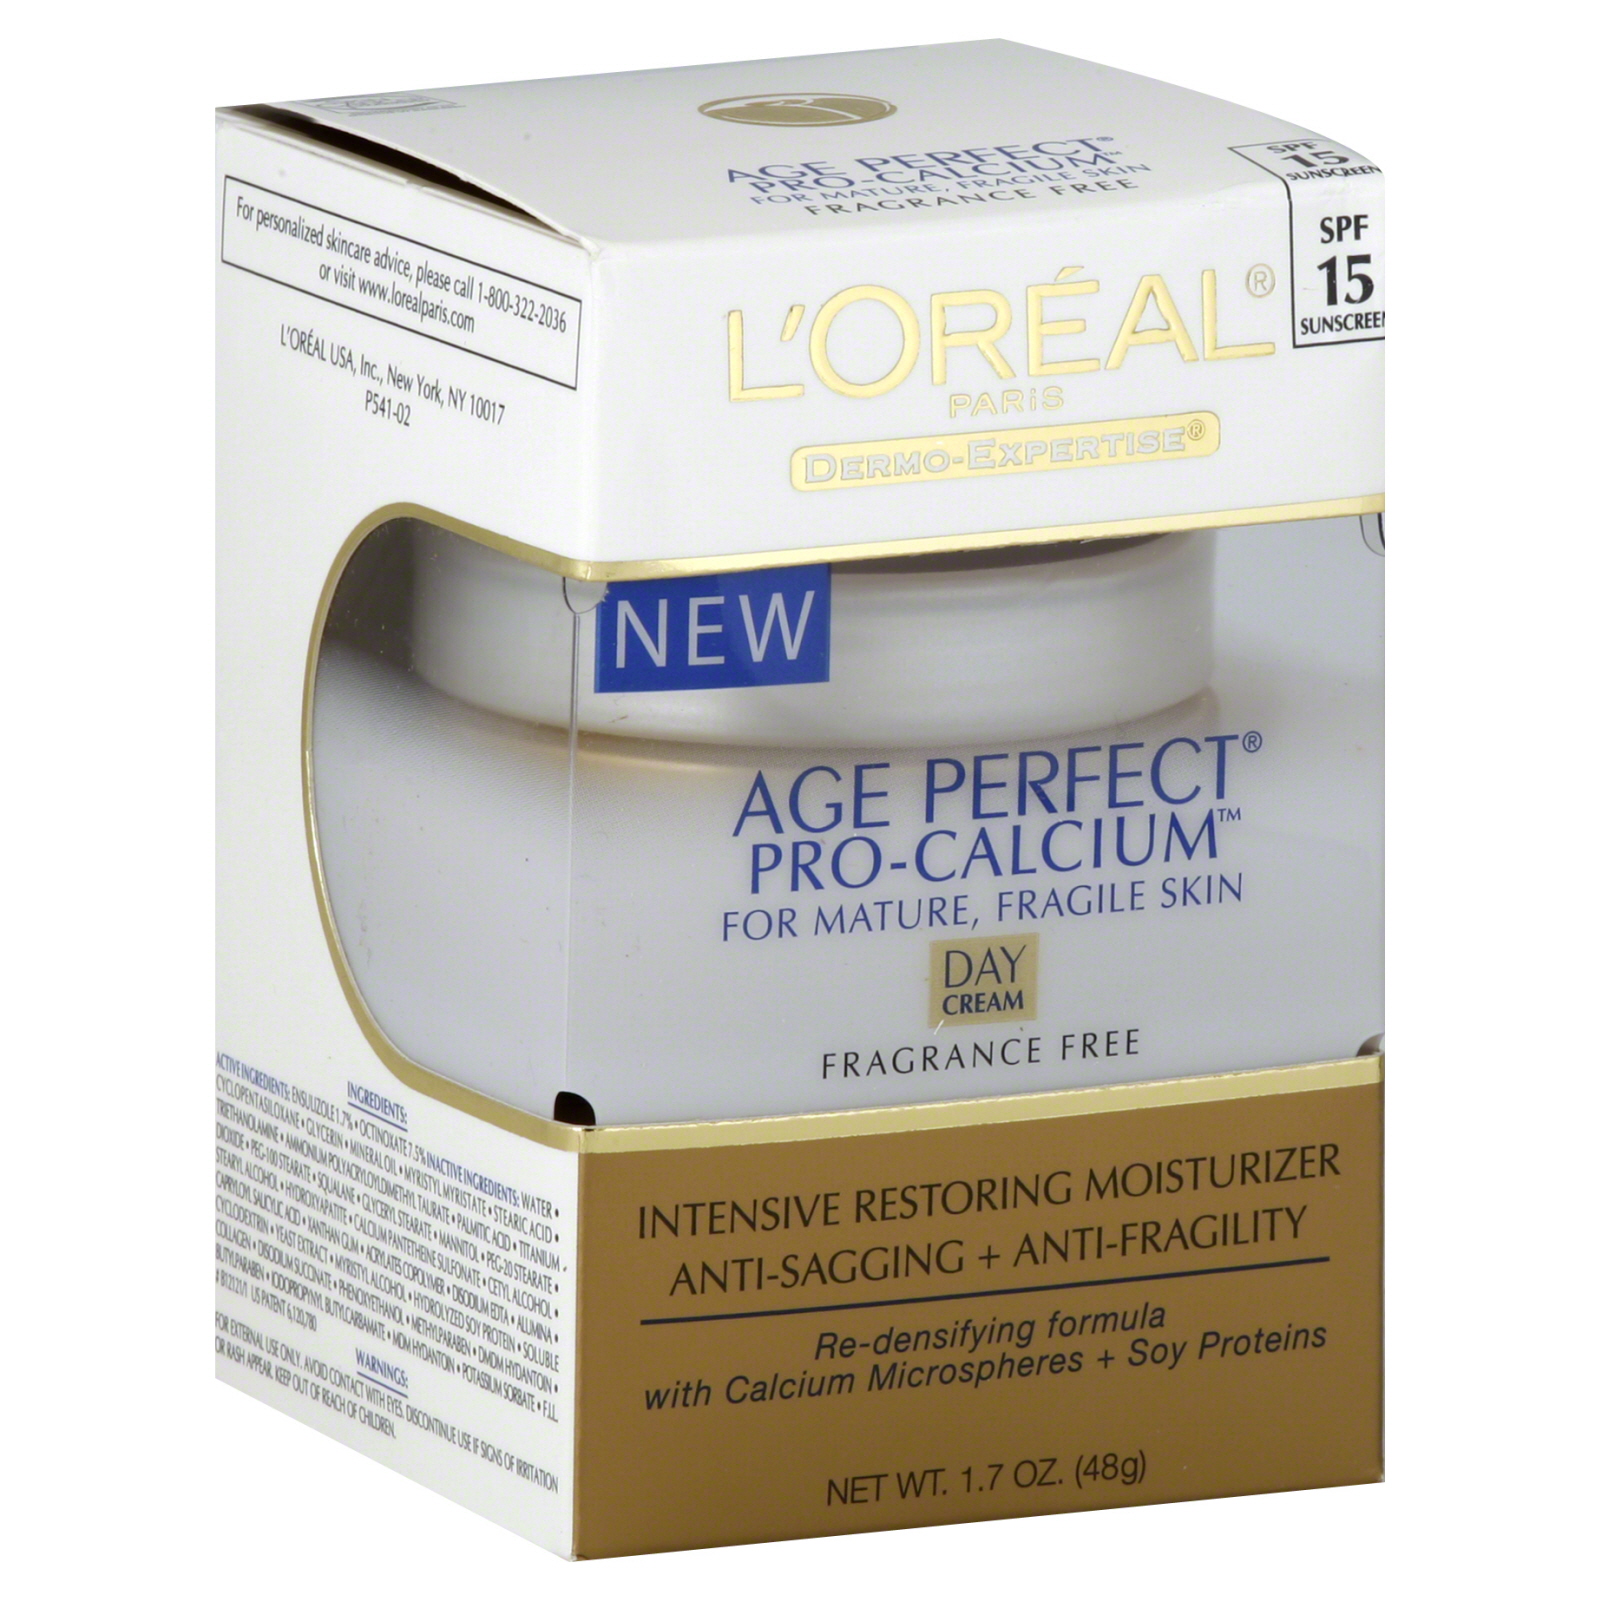 Age Perfect Pro-Calcium Dermo-Expertise Day Cream, for Mature, Fragile Skin, SPF 15 Sunscreen, 1.7 oz (48 g)